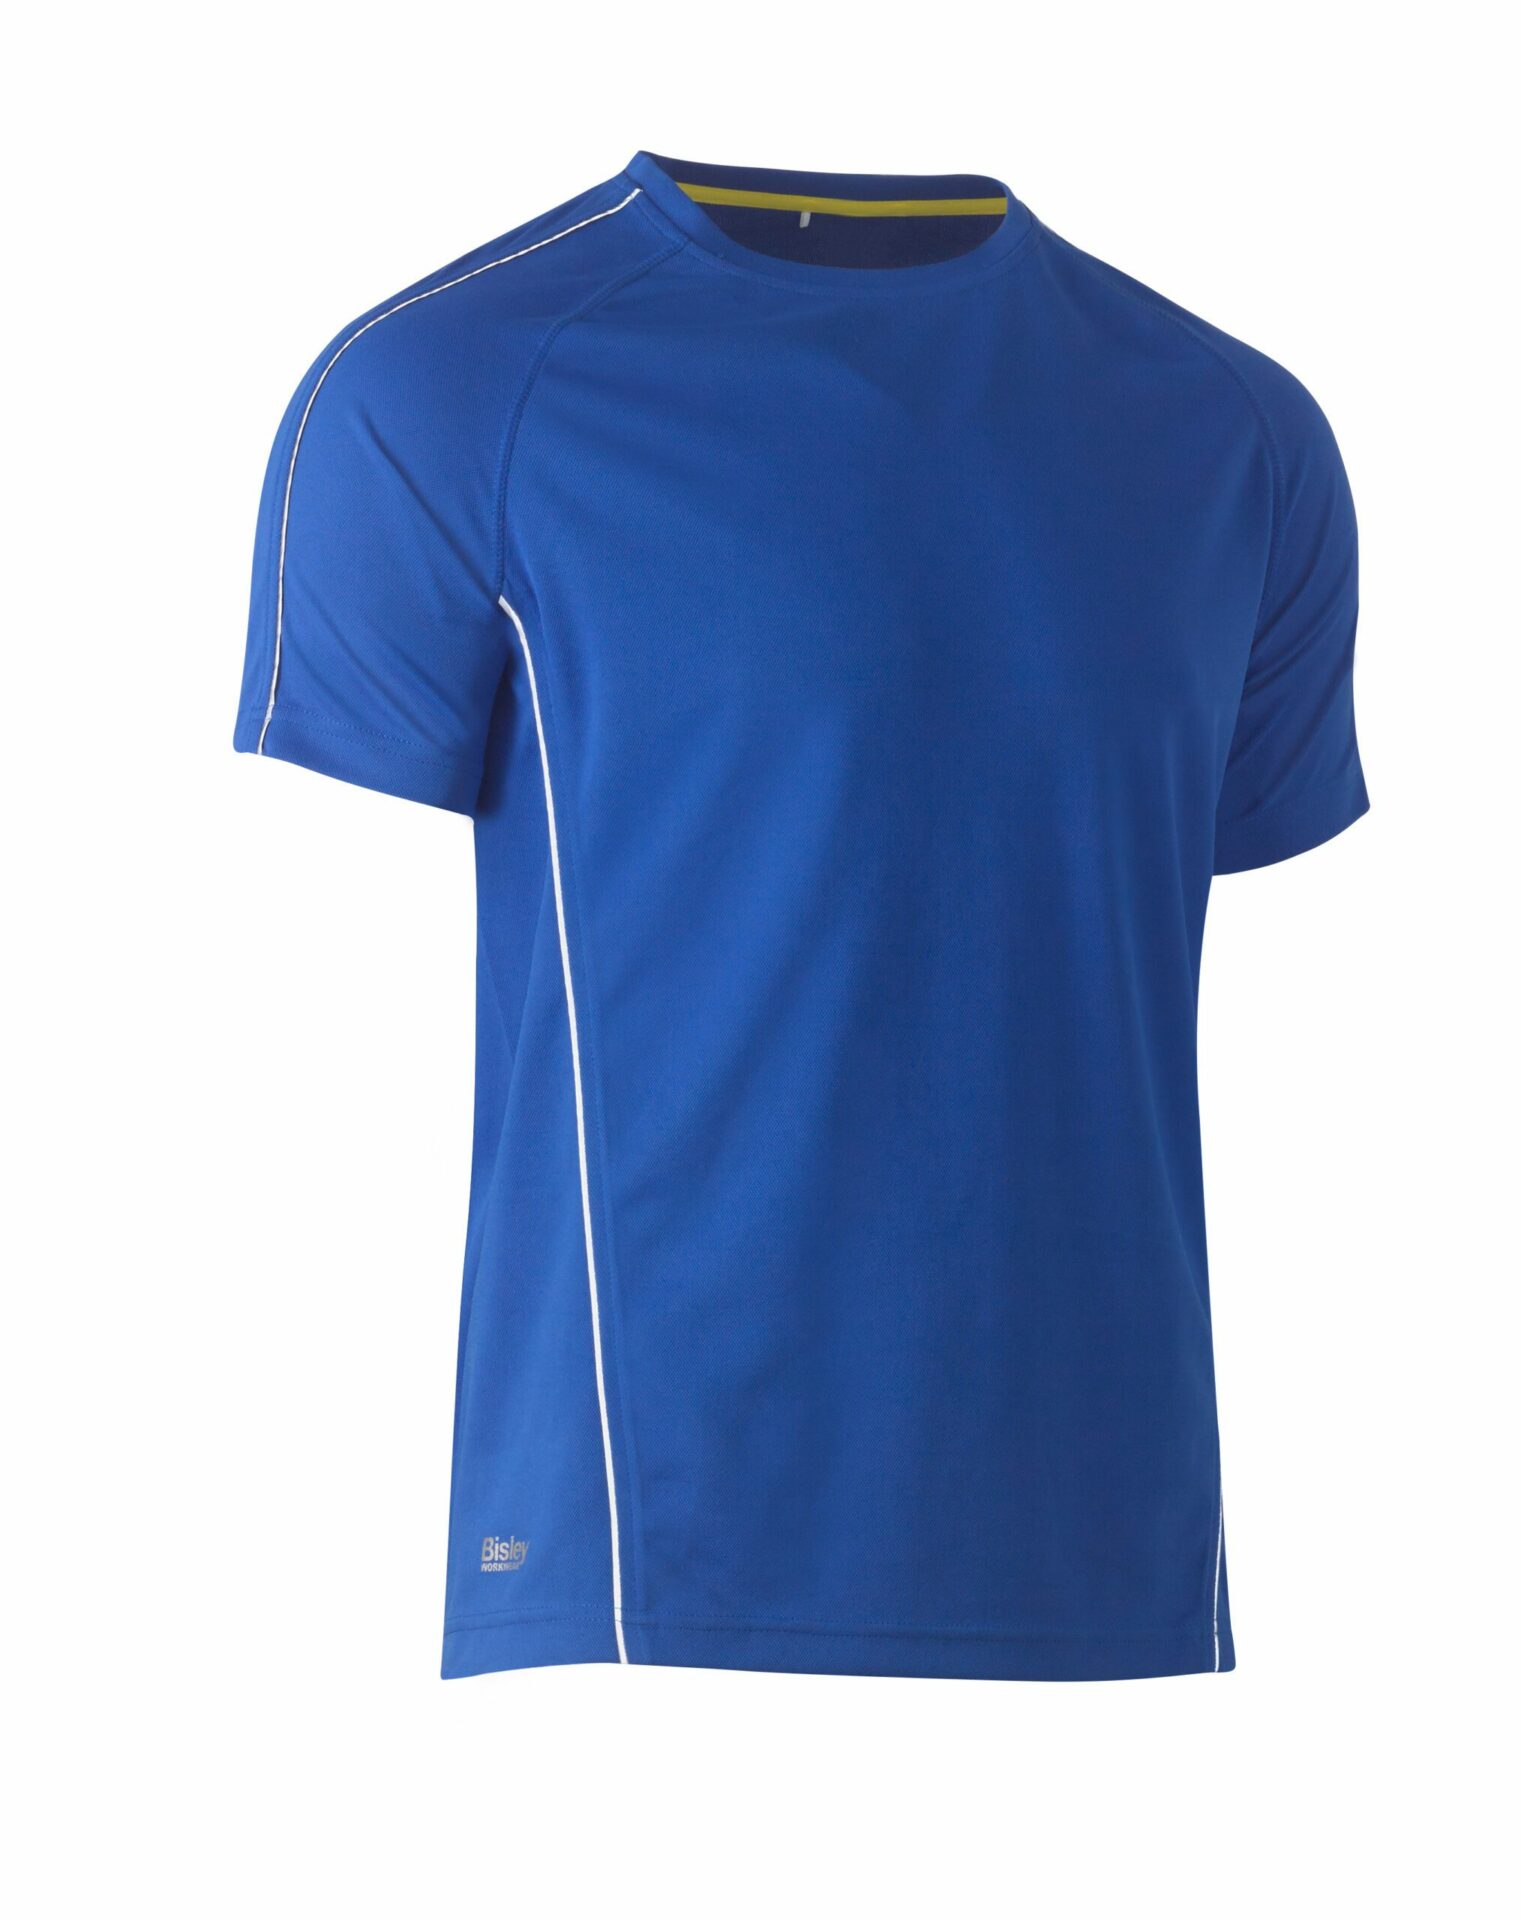 Buy BK1426-Cool Mesh Tee With Reflective Piping at Best Price - AJ Safety